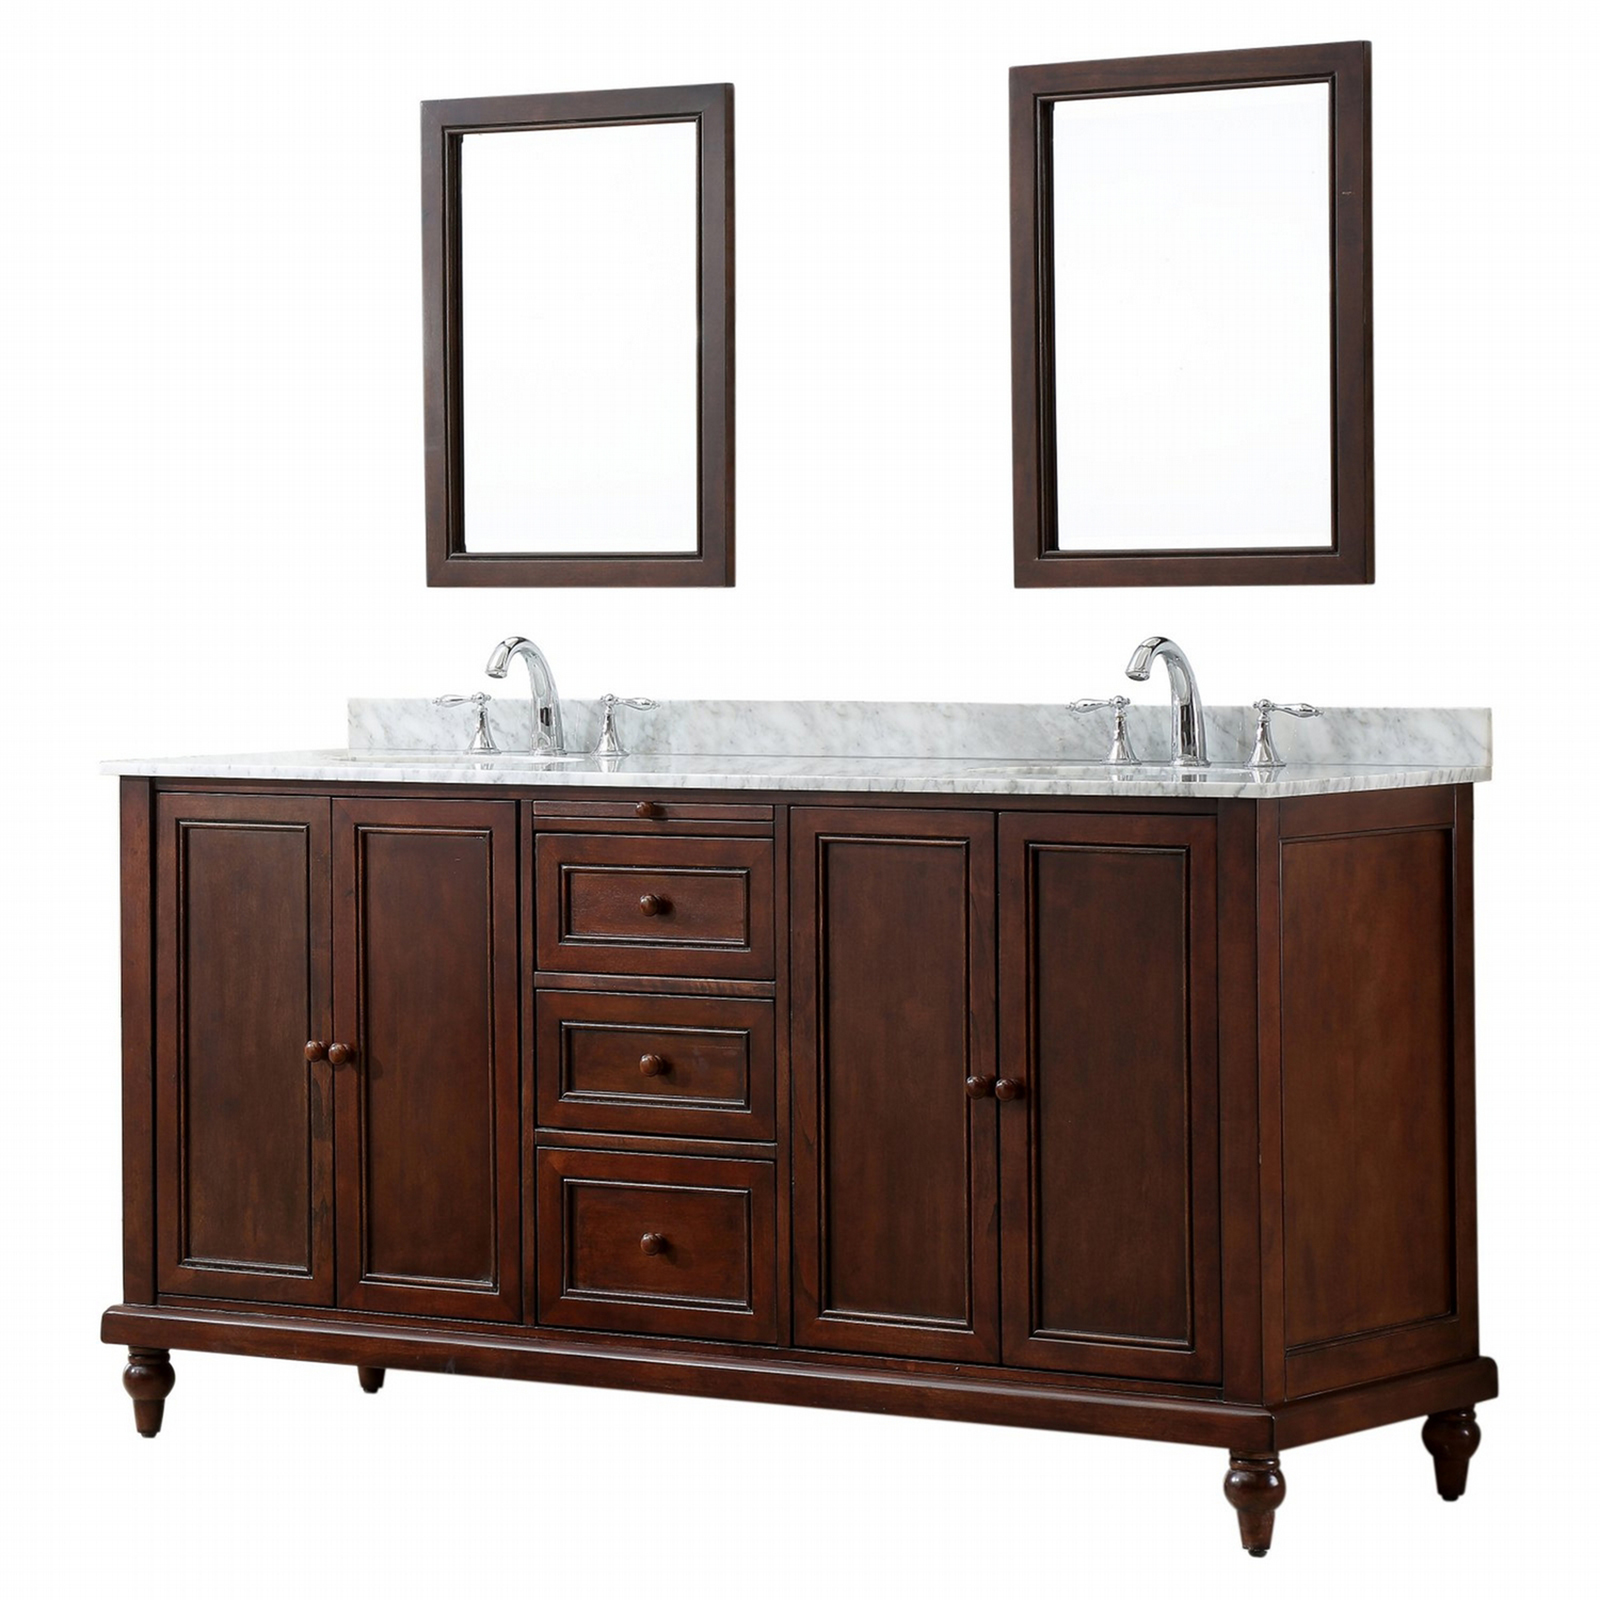 J & J 70" 3-Drawer Traditional Double-Sink Bathroom Vanity - Classic Pearl White